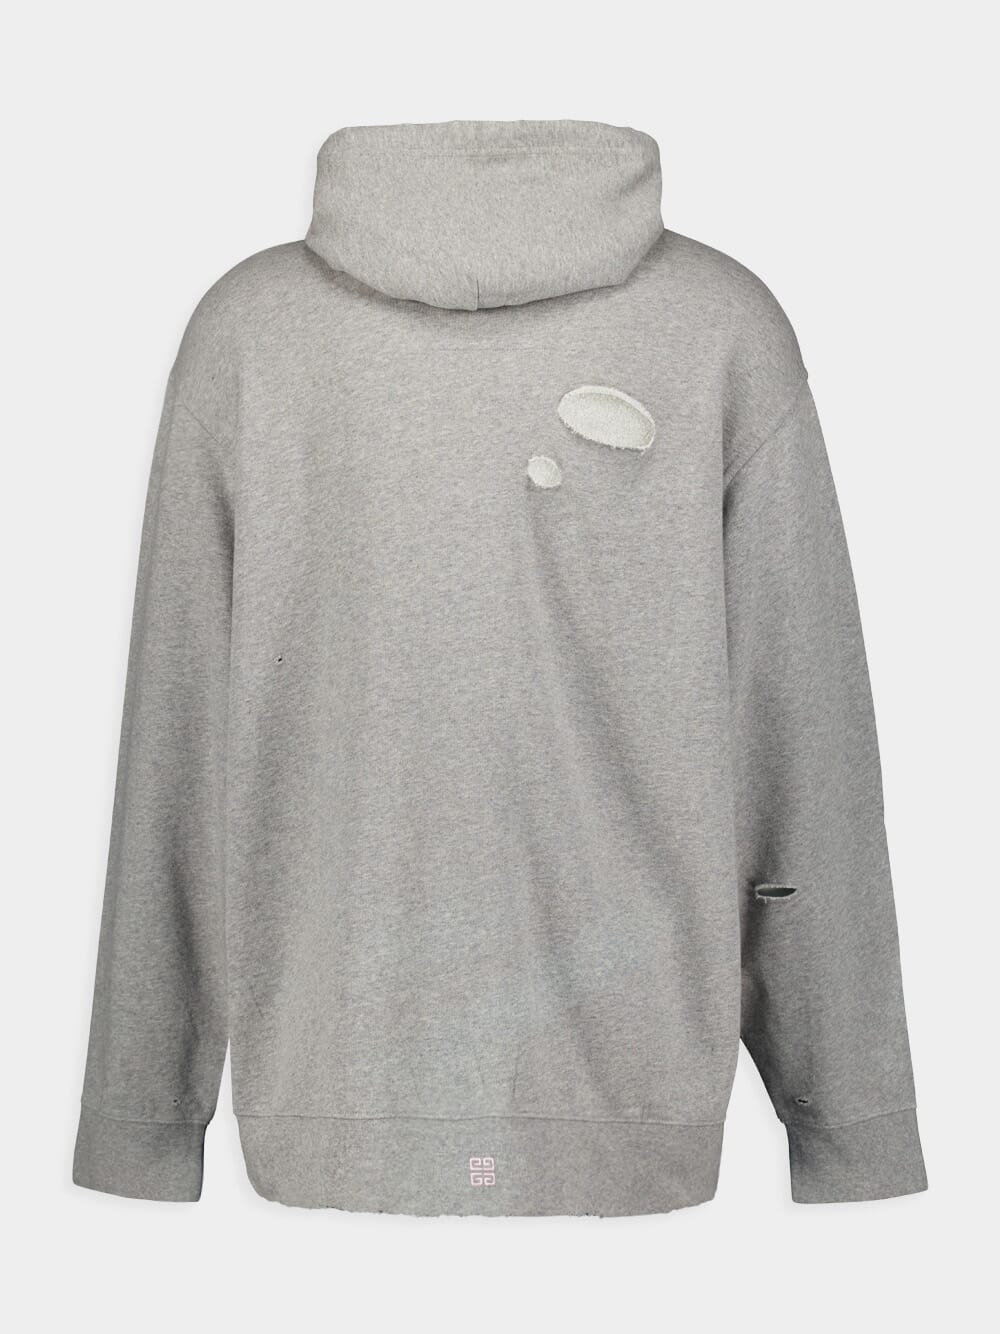 GivenchyCotton Hoodie In Fleece With Cut And Sewn Effect at Fashion Clinic